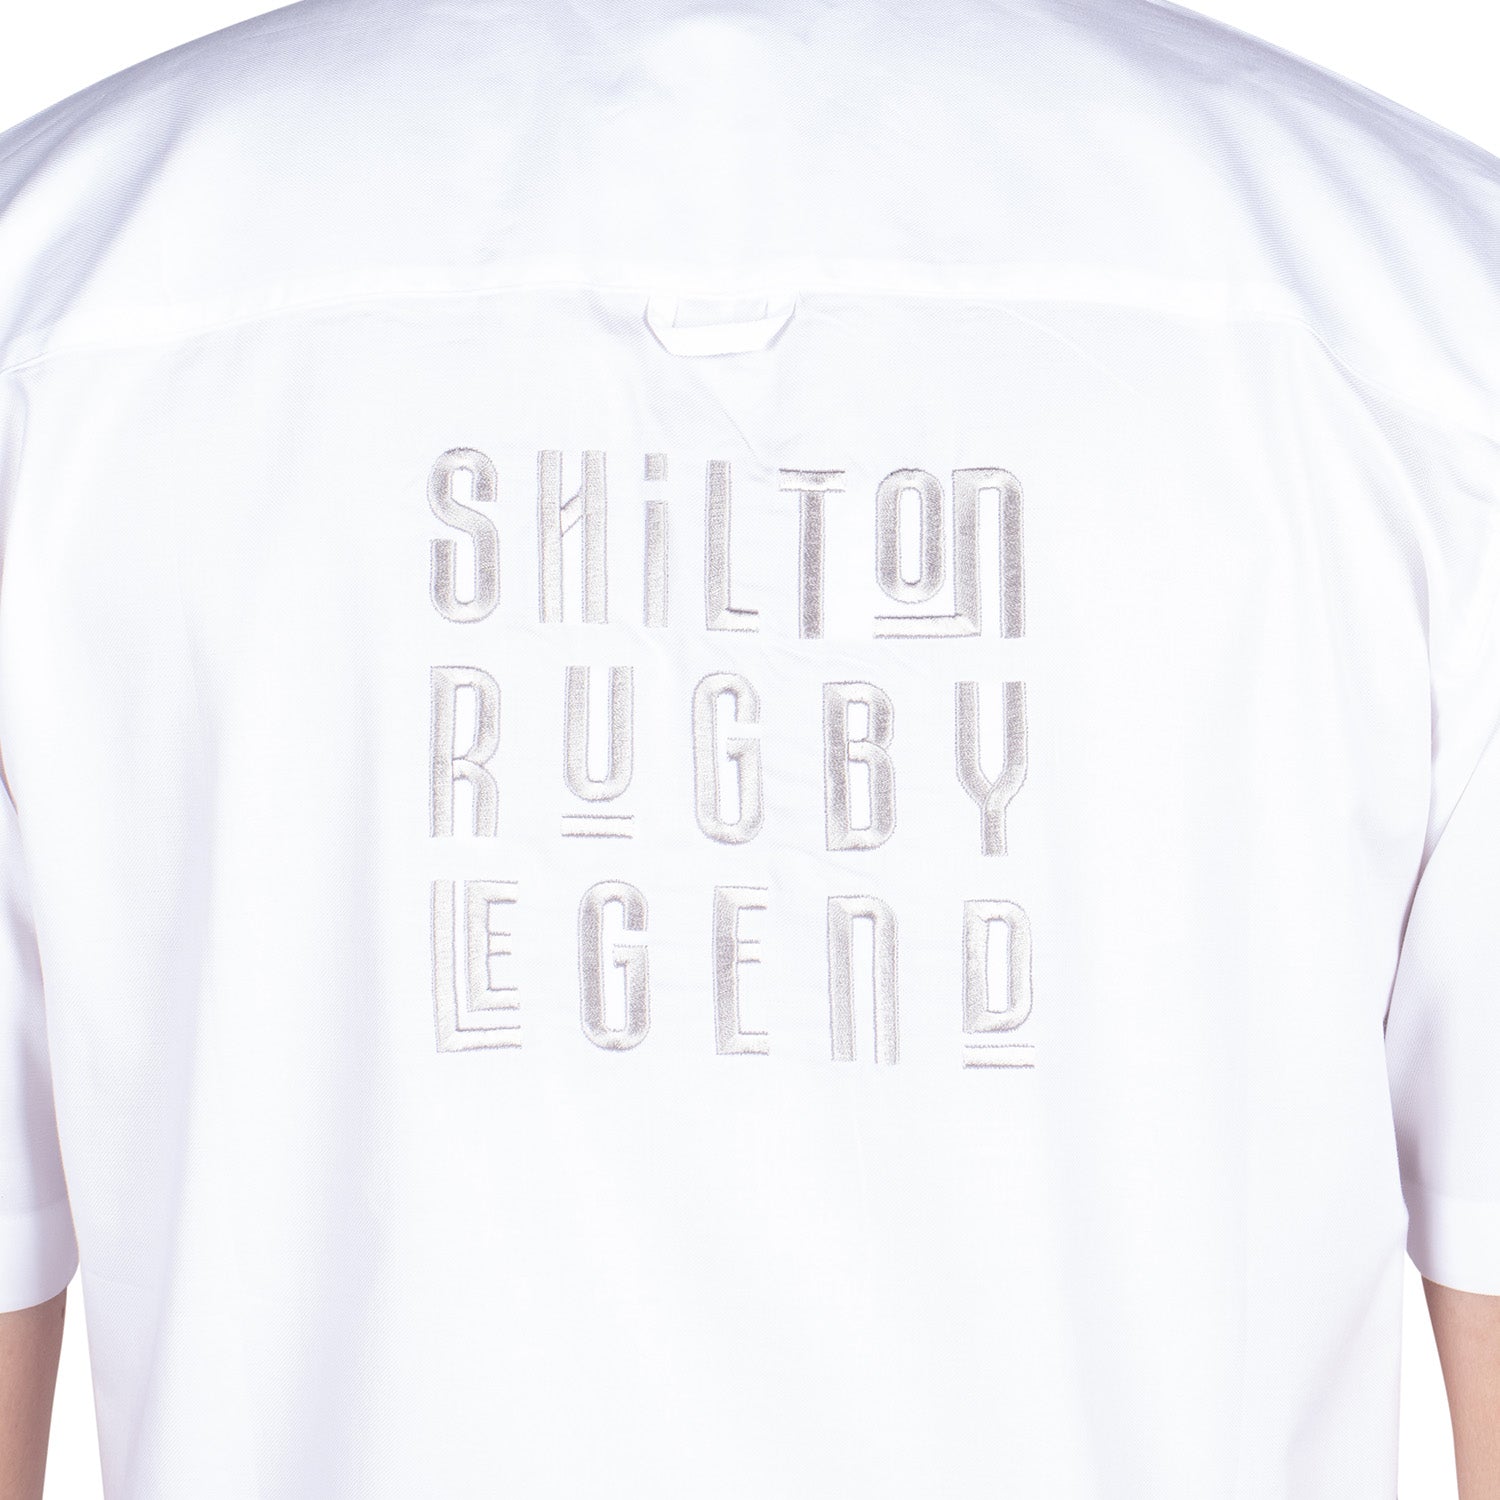 Chemise rugby legend